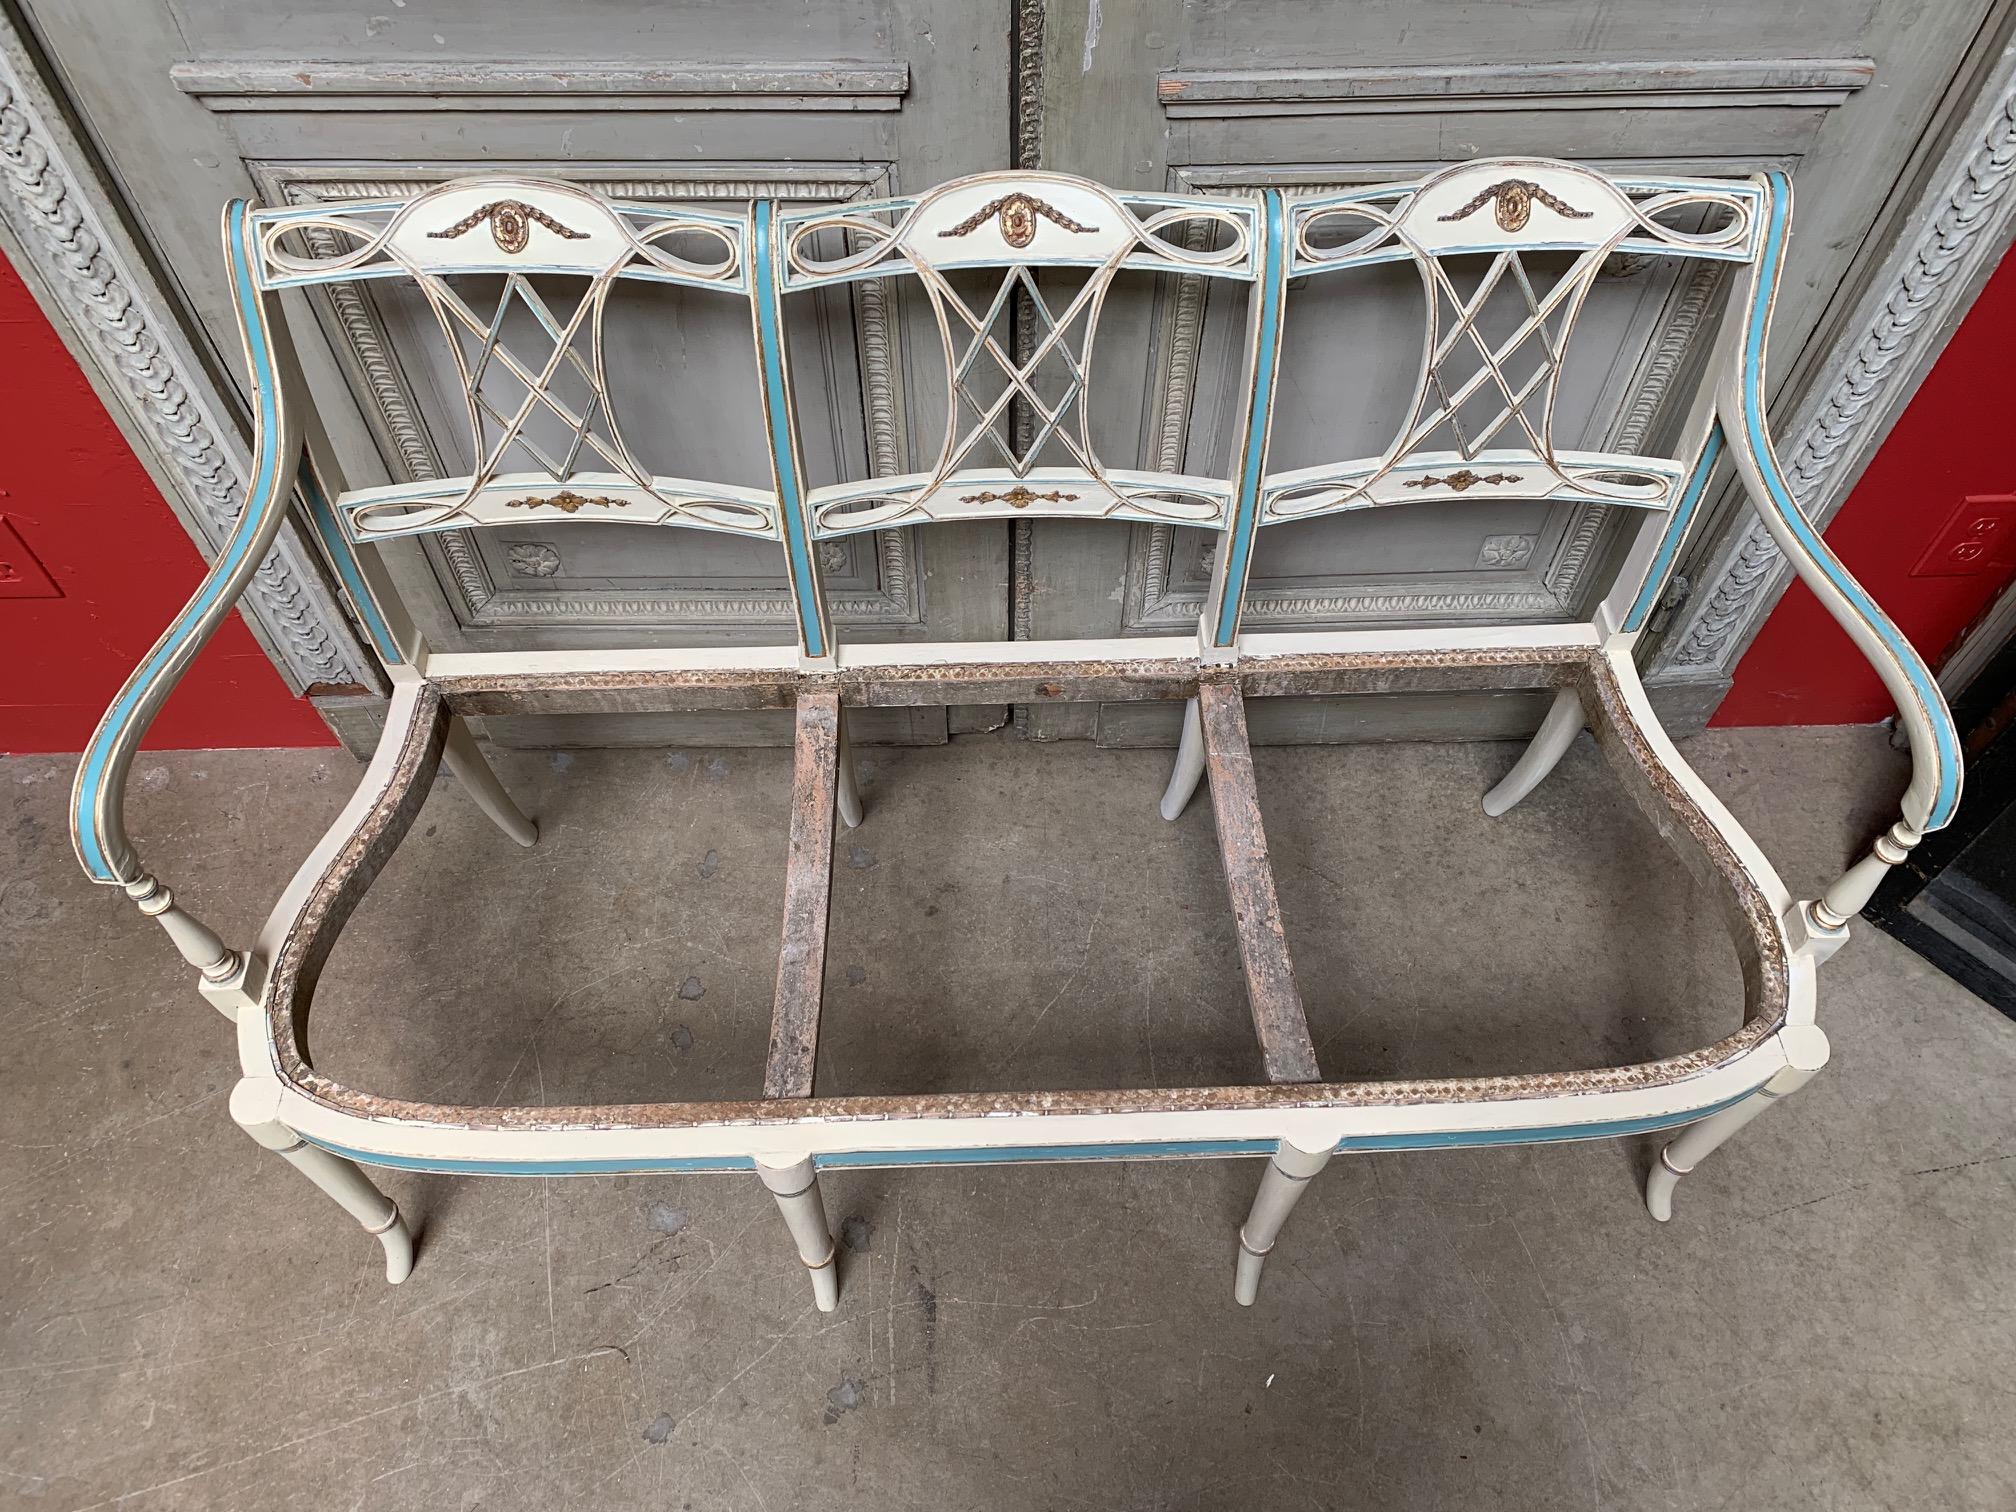 19th Century Italian Settee with a White, Blue and Gold Leaf Finish In Good Condition For Sale In Dallas, TX